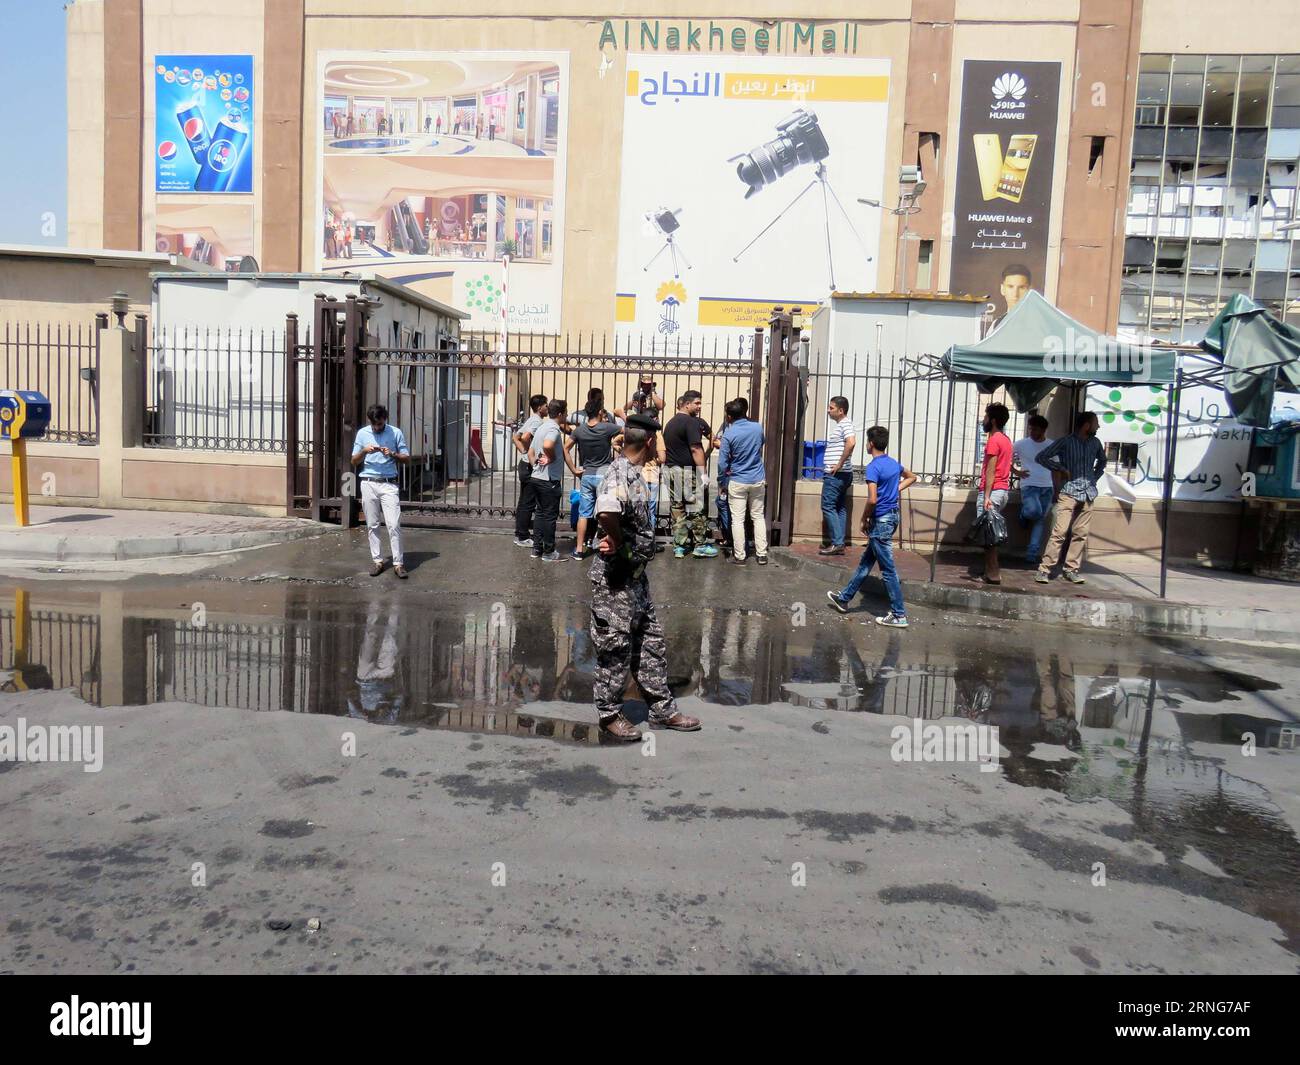 Irak: Anschlag in Bagdad (160910) -- BAGHDAD, Sept. 10, 2016 -- People and security members gather at the site of bomb explosions in Baghdad, Iraq, Sept. 10, 2016. The Islamic State (IS) group on Saturday claimed responsibility for two bomb explosions at a busy mall in the Iraqi capital of Baghdad that killed 11 people and wounded 29 others, the group said in an online statement. Khalil )(hy) IRAQ-BAGHDAD-ATTACK Dawood PUBLICATIONxNOTxINxCHN   Iraq Stop in Baghdad 160910 Baghdad Sept 10 2016 Celebrities and Security Members gather AT The Site of Bomb Explosions in Baghdad Iraq Sept 10 2016 The Stock Photo